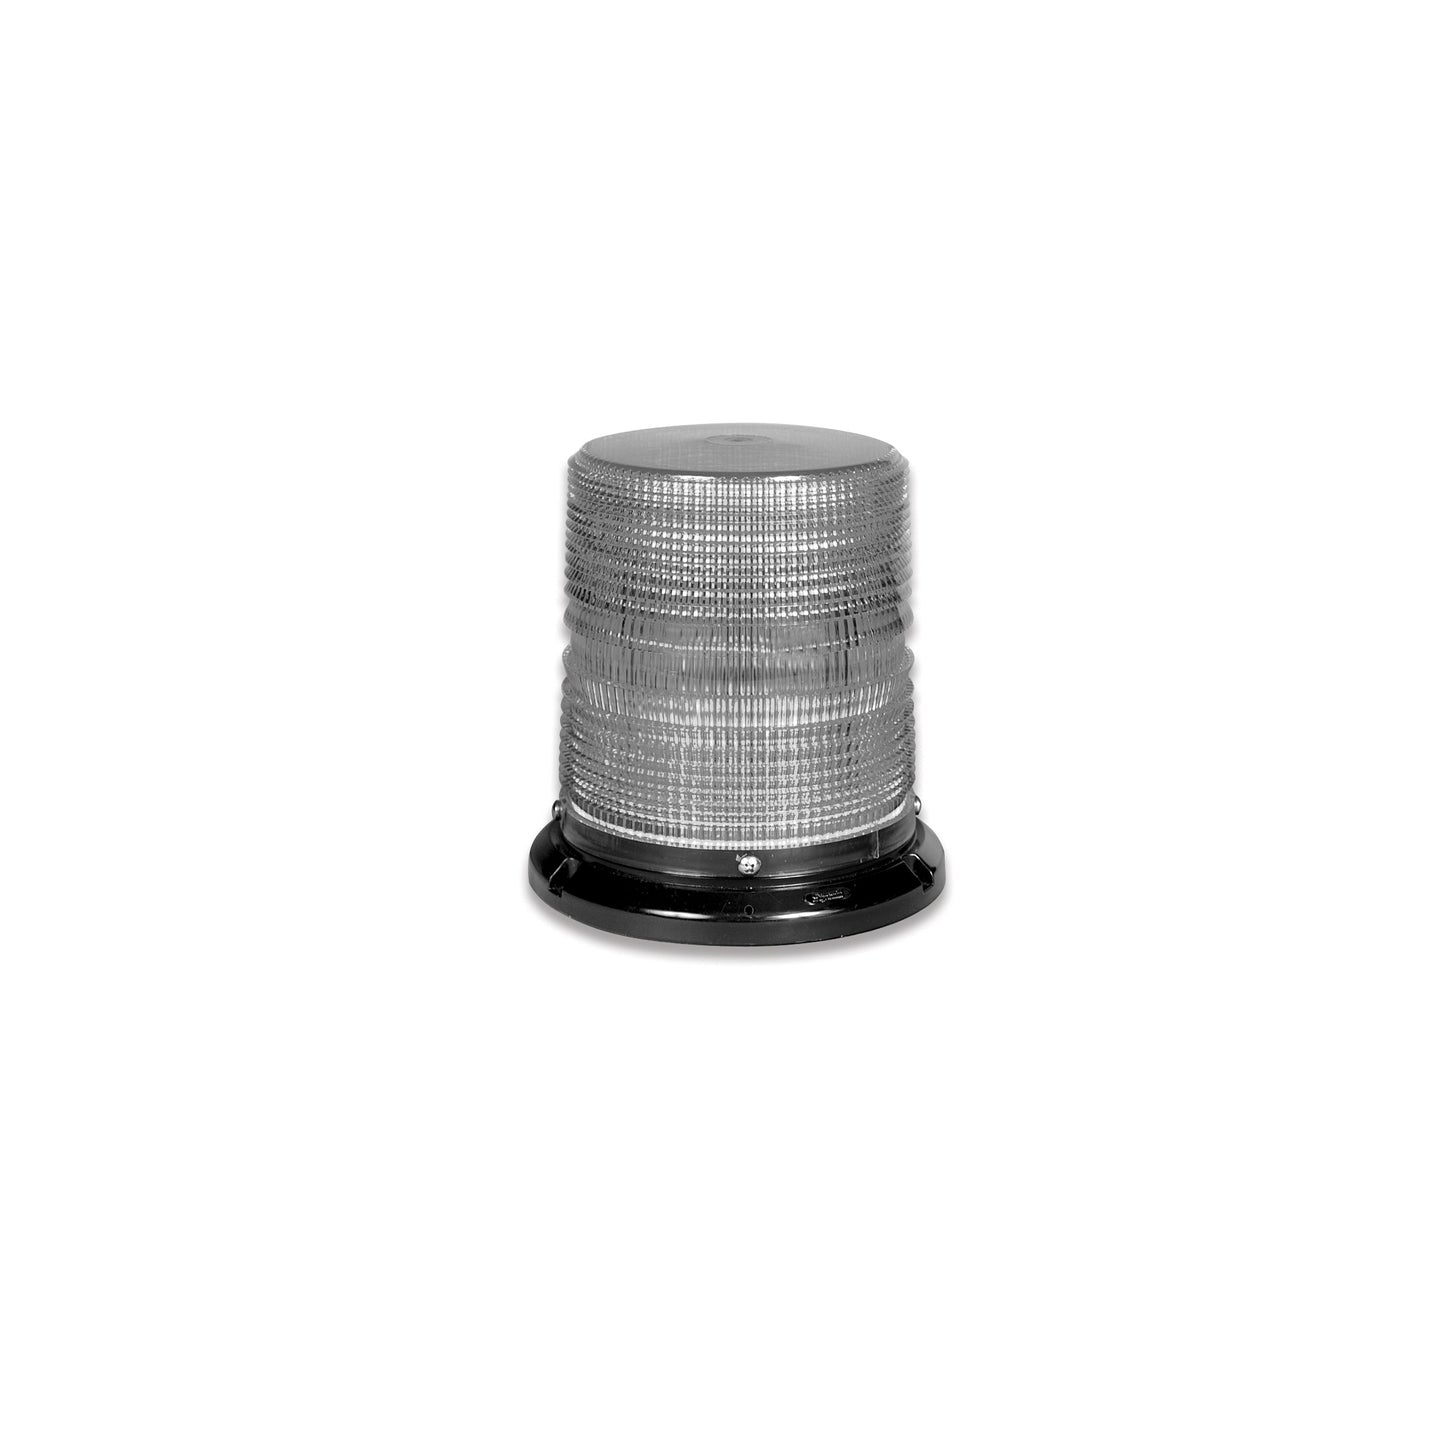 Soundoff Signal E360DC6 Clear Dust Cover - Ca Title 13 Compliancy (Fits 3000, 4200, 4500 & 4800 Series Beacons, 4" & 6" Dome Heights